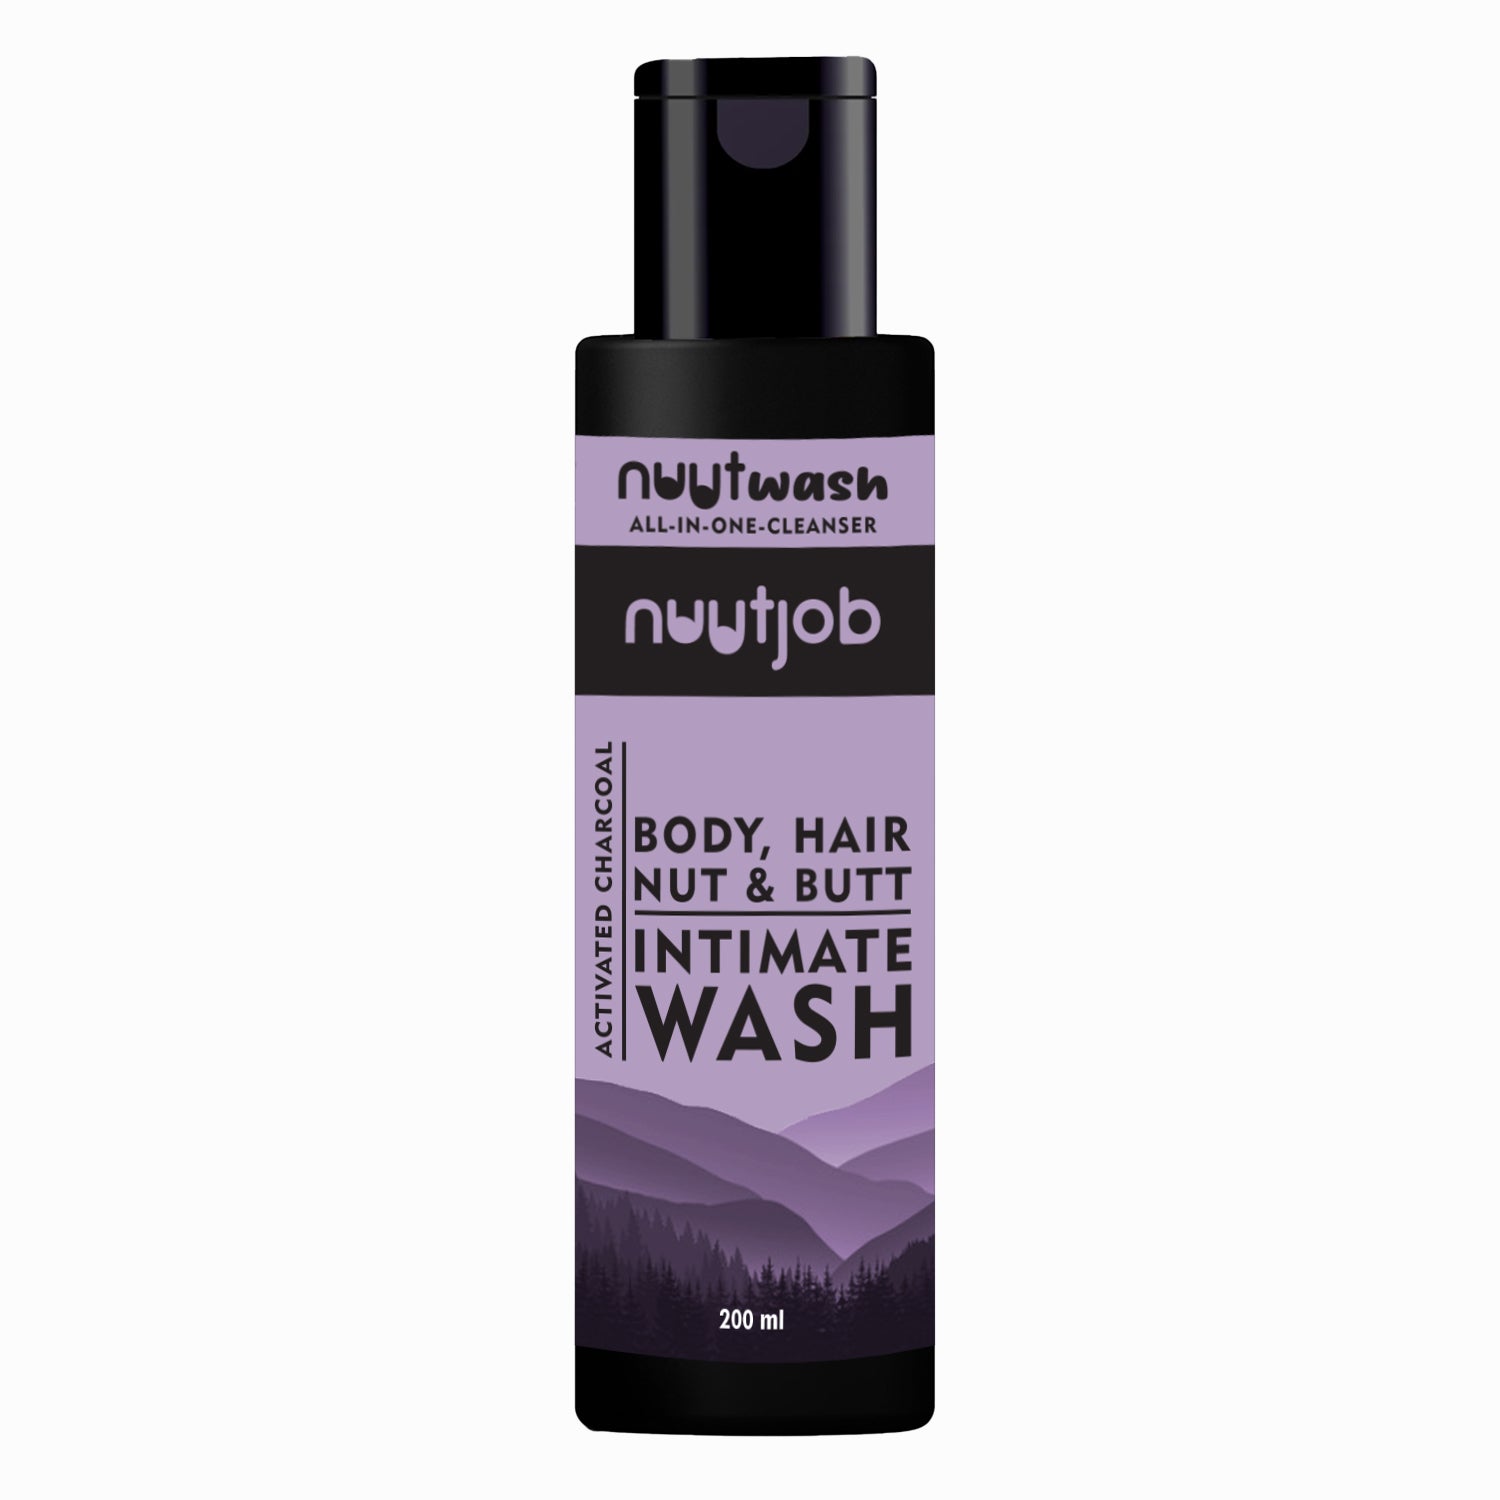 Nuutwash Intimate Nut, Butt, Body And Hair Wash Four-In-One Cleanser 200ml